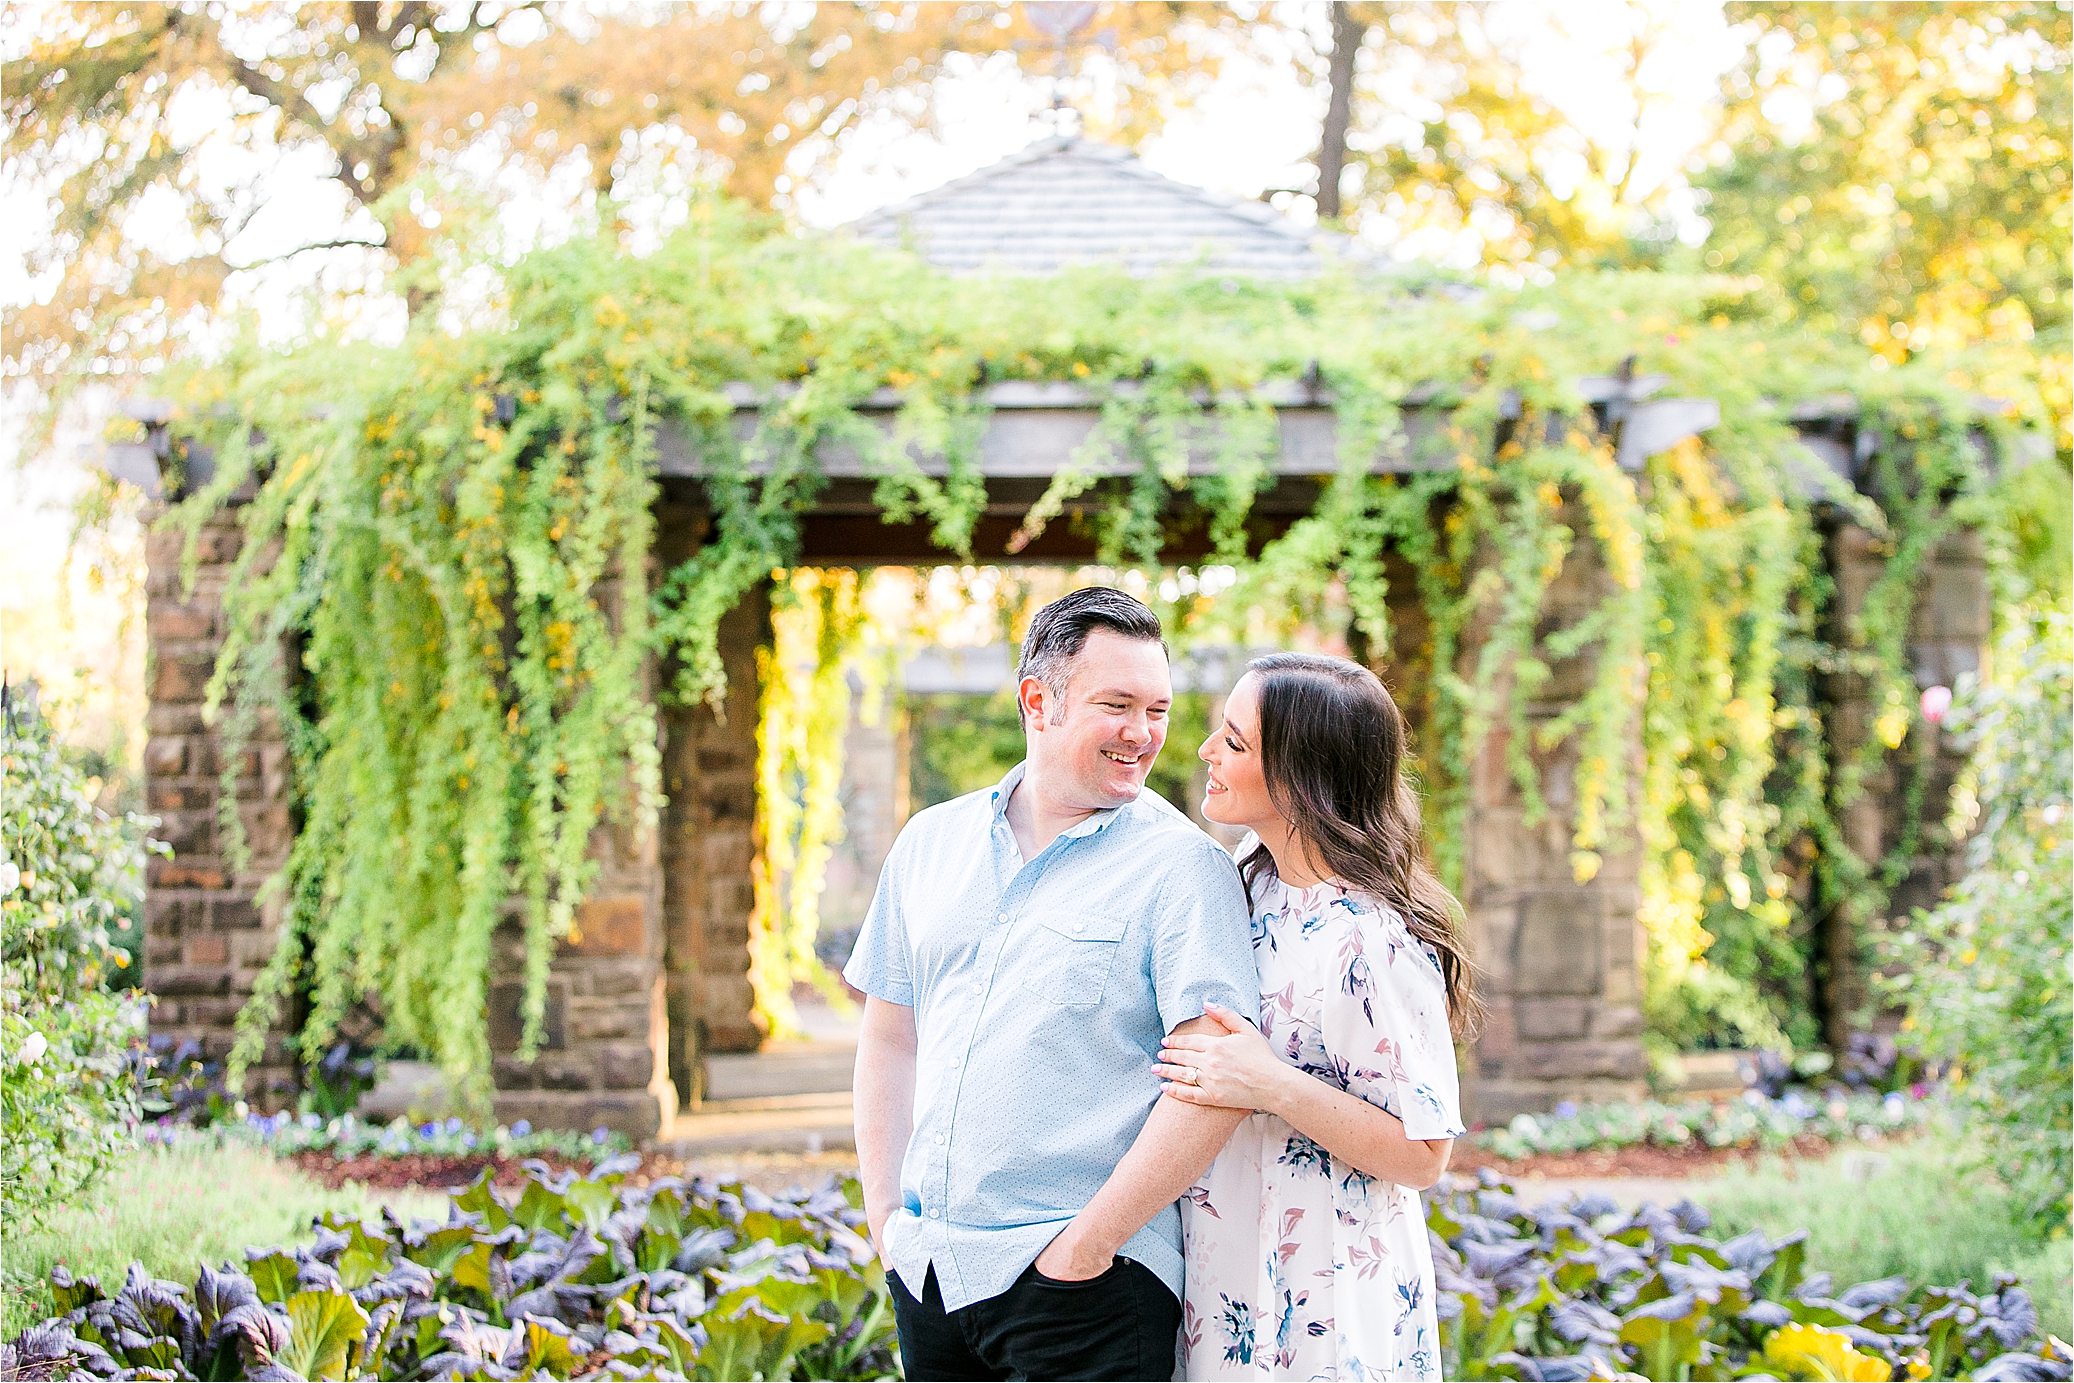 A bride to be hugs her groom from behind in front of an arch of greenery on a sunny, fall day at The Fort Worth Botanic Garden during their engagement session 